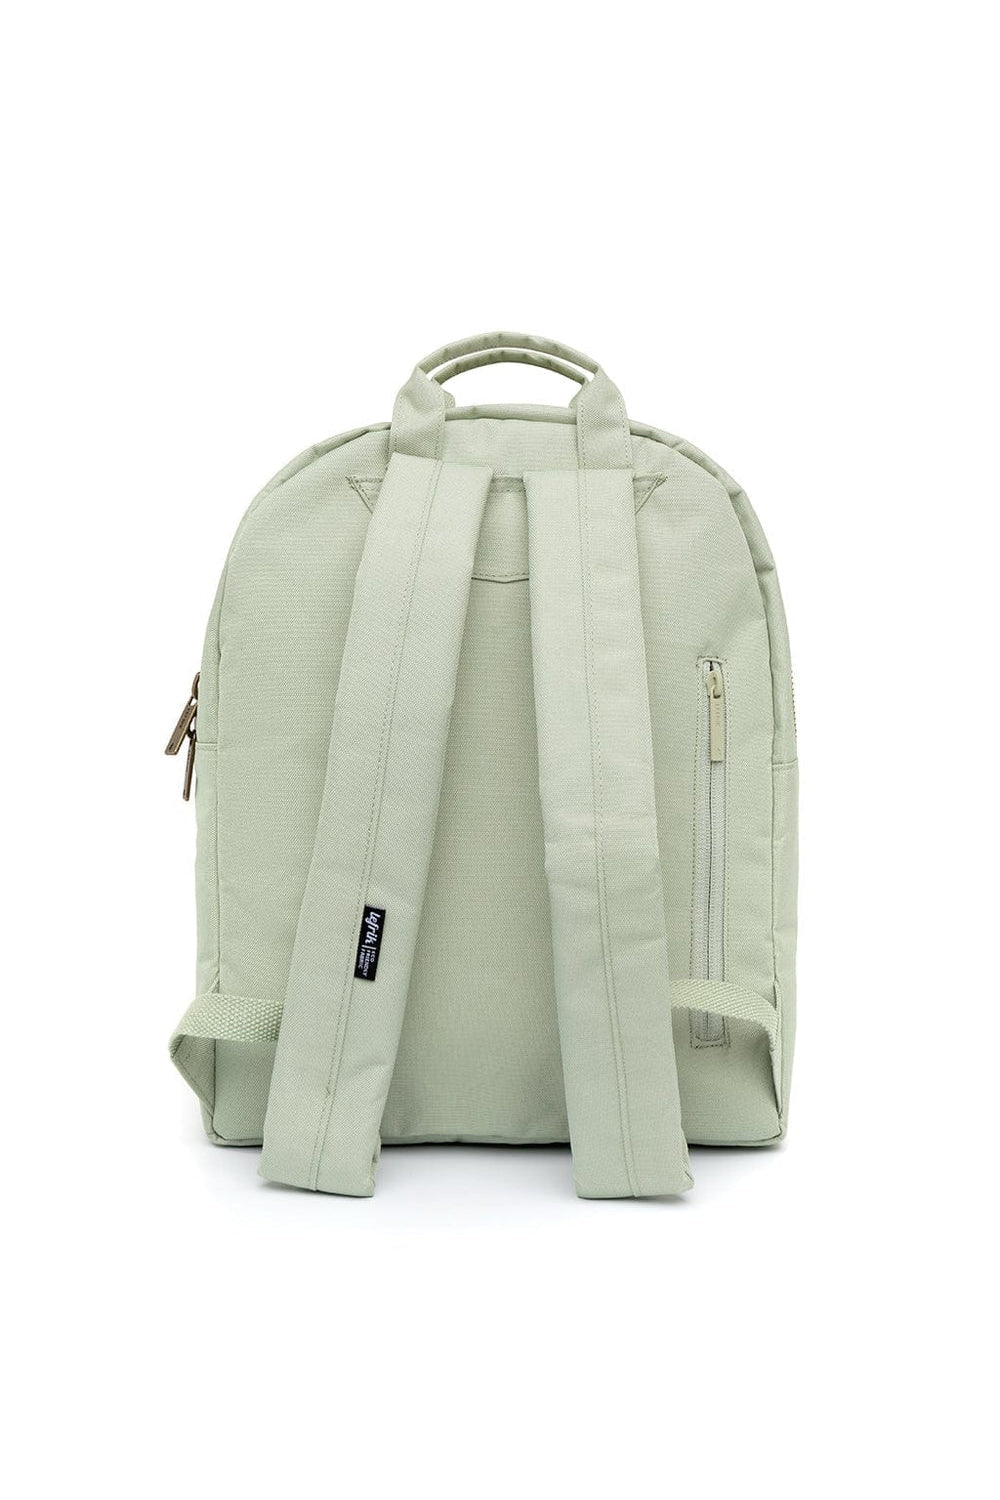 Lefrik Gold Classic Sage-Accessories-Ohh! By Gum - Shop Sustainable